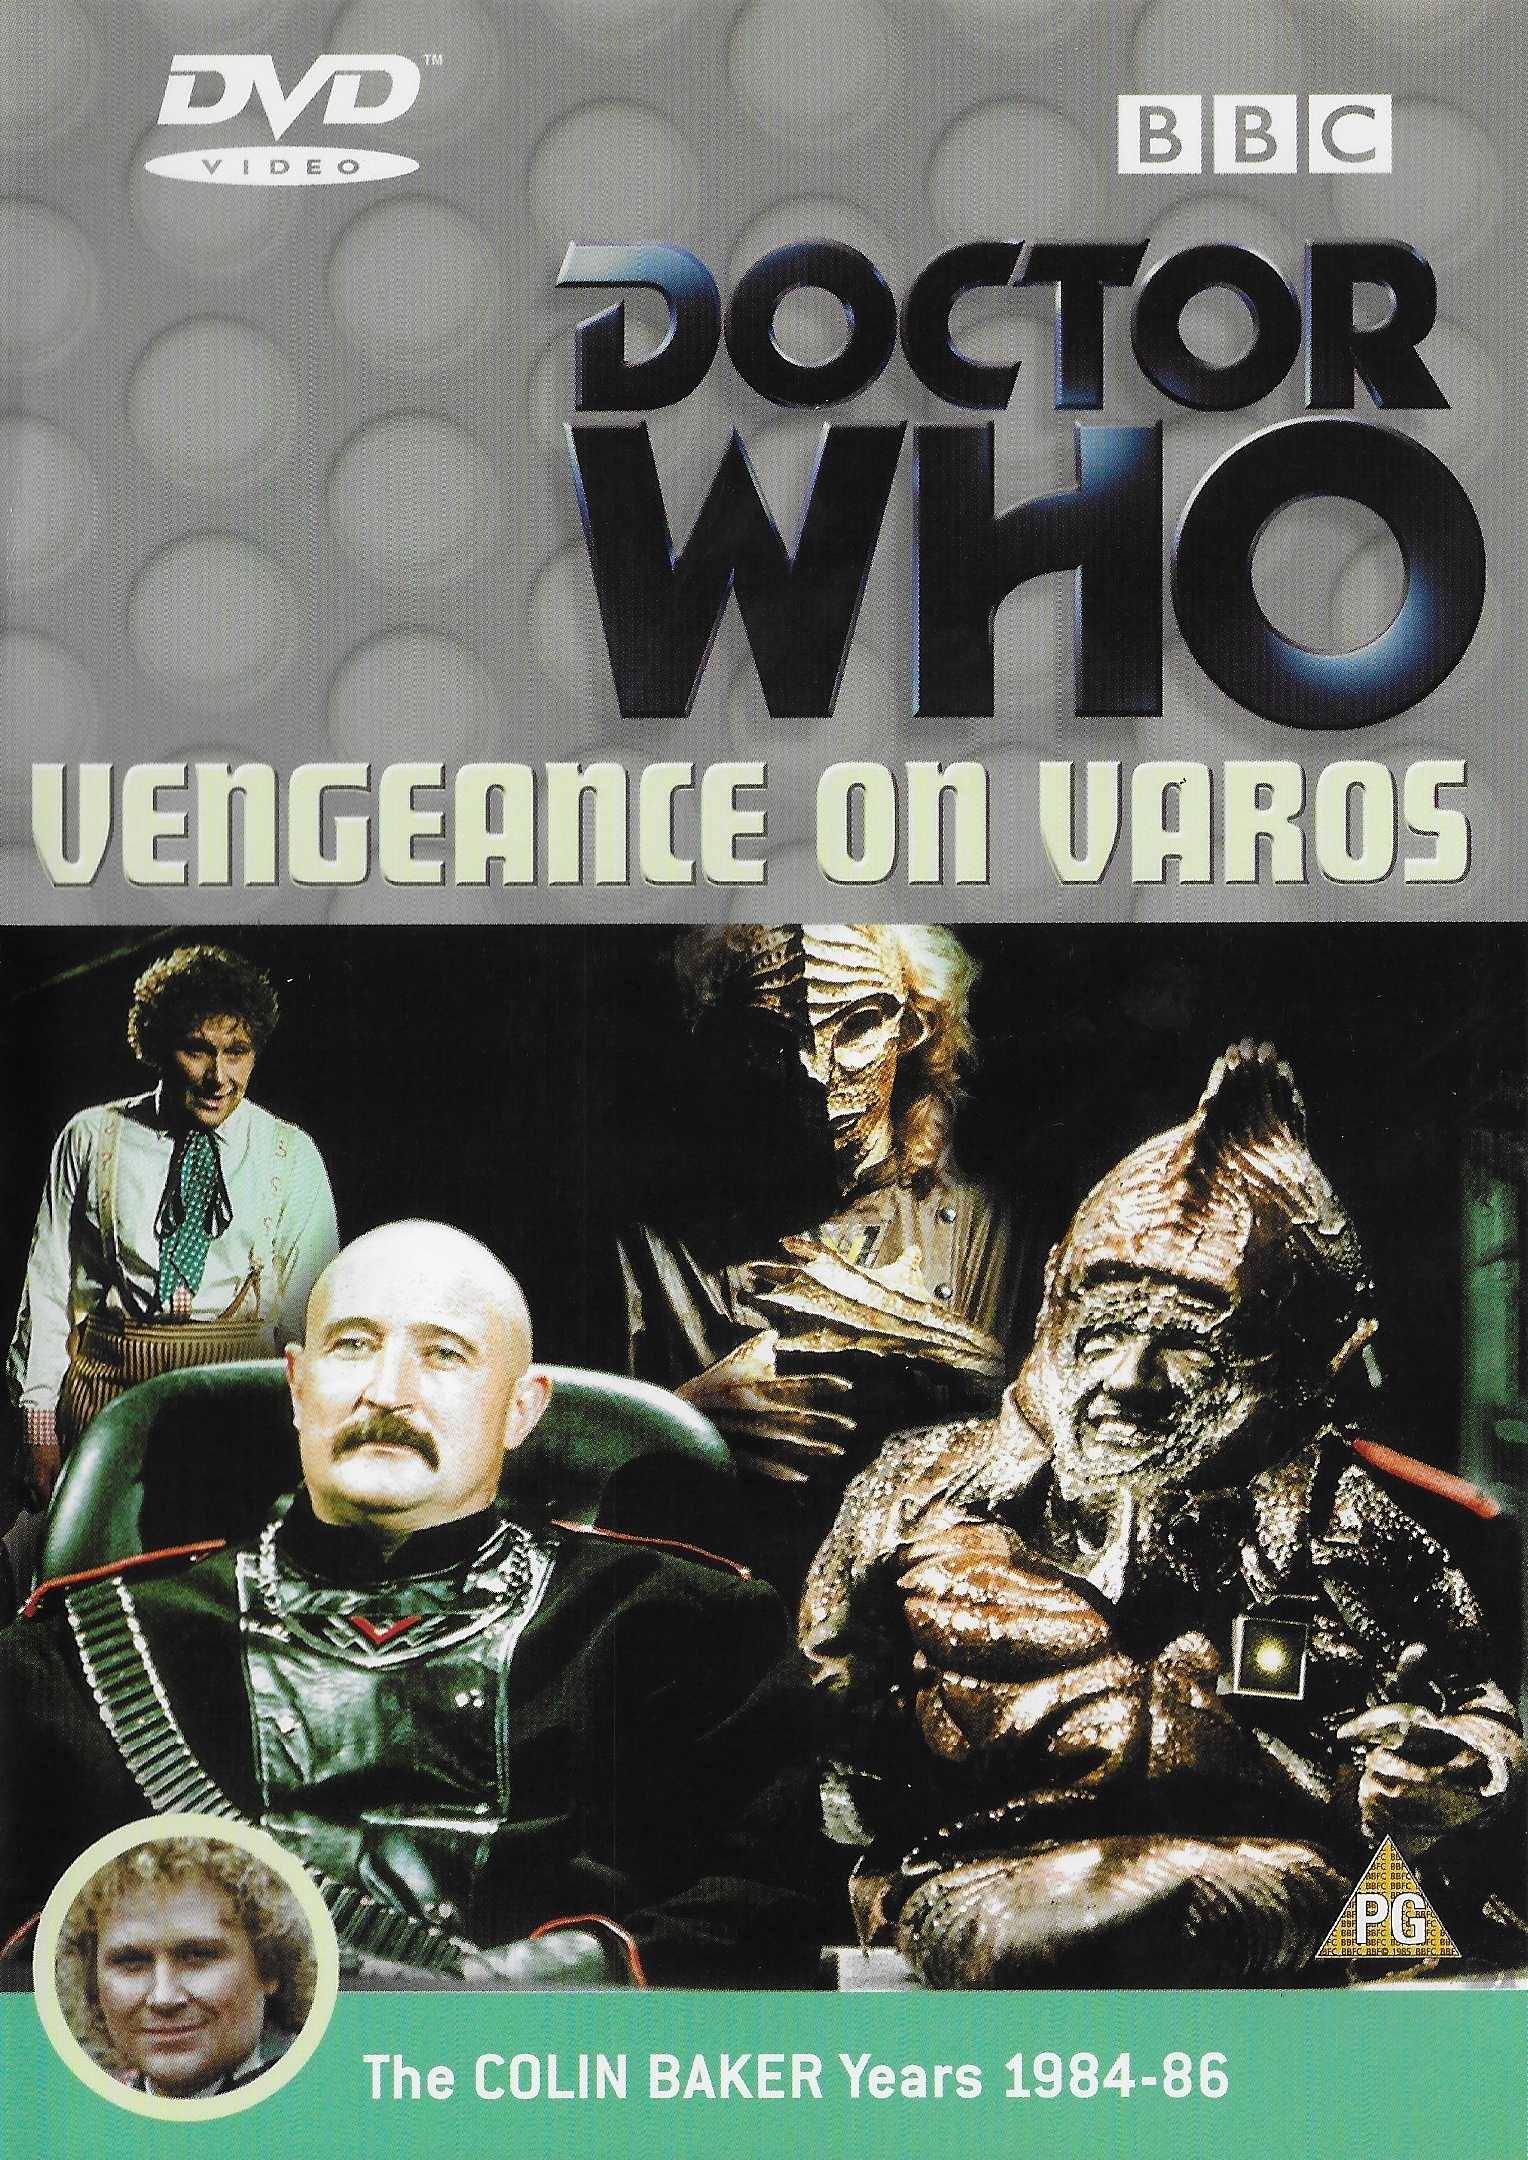 Picture of Doctor Who - Vengence on Varos by artist Philip Martin from the BBC dvds - Records and Tapes library